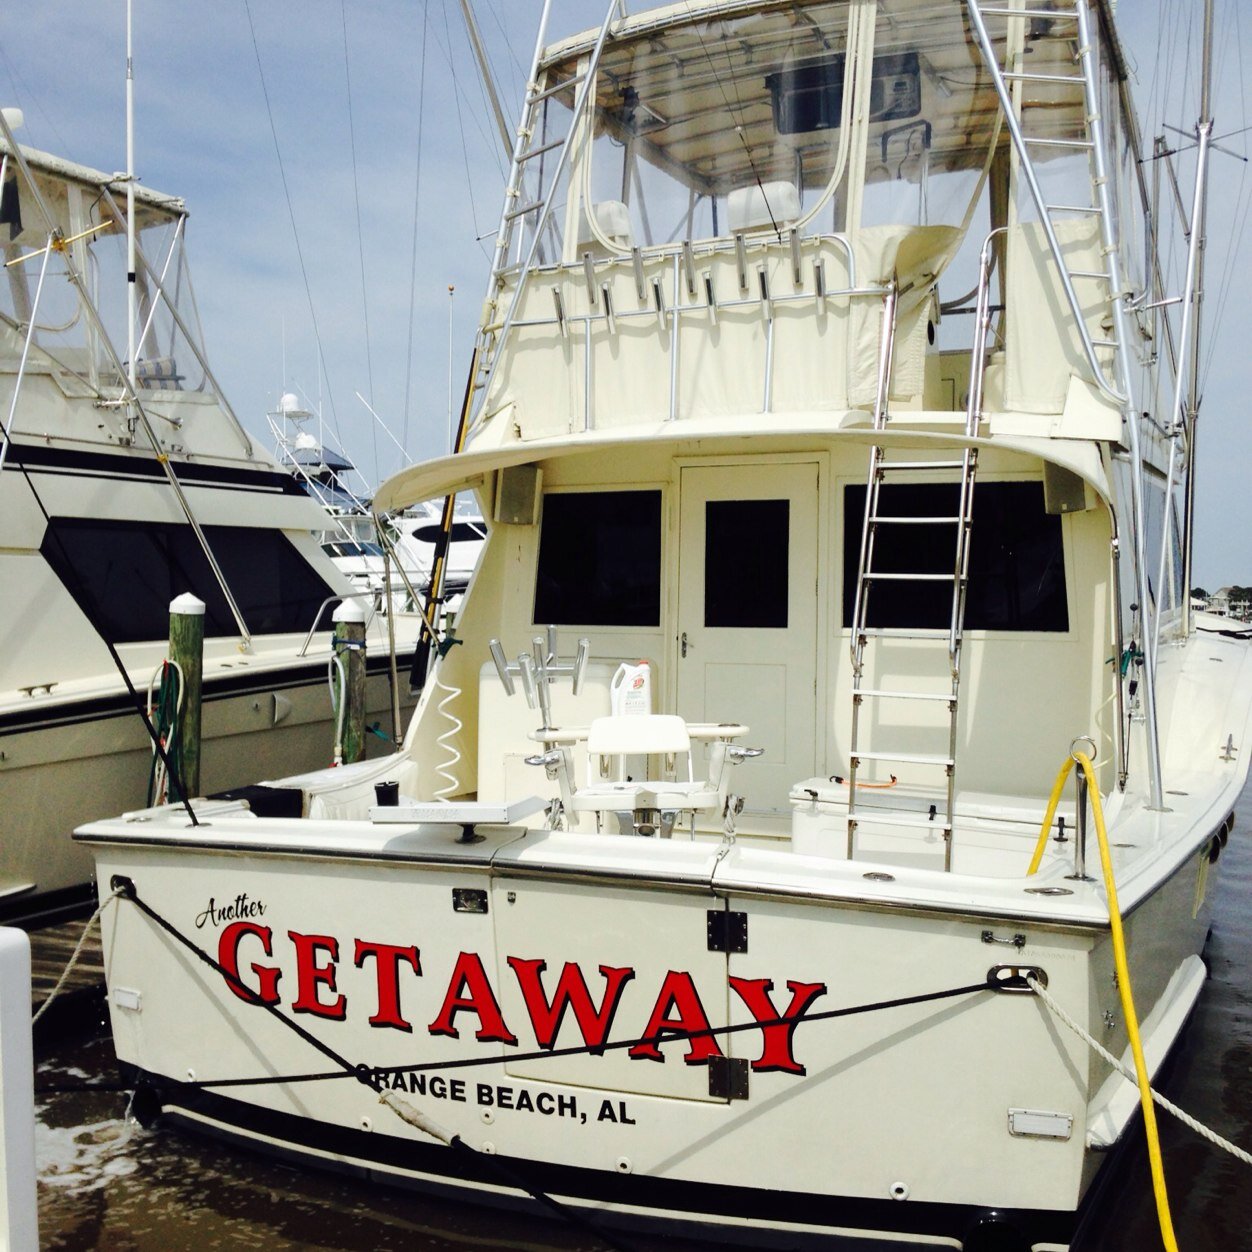 Fishing Charters for the family, kids, 1st time anglers and experienced anglers. We offer two beautiful Hatteras sport fishing yachts for your fishing comfort.